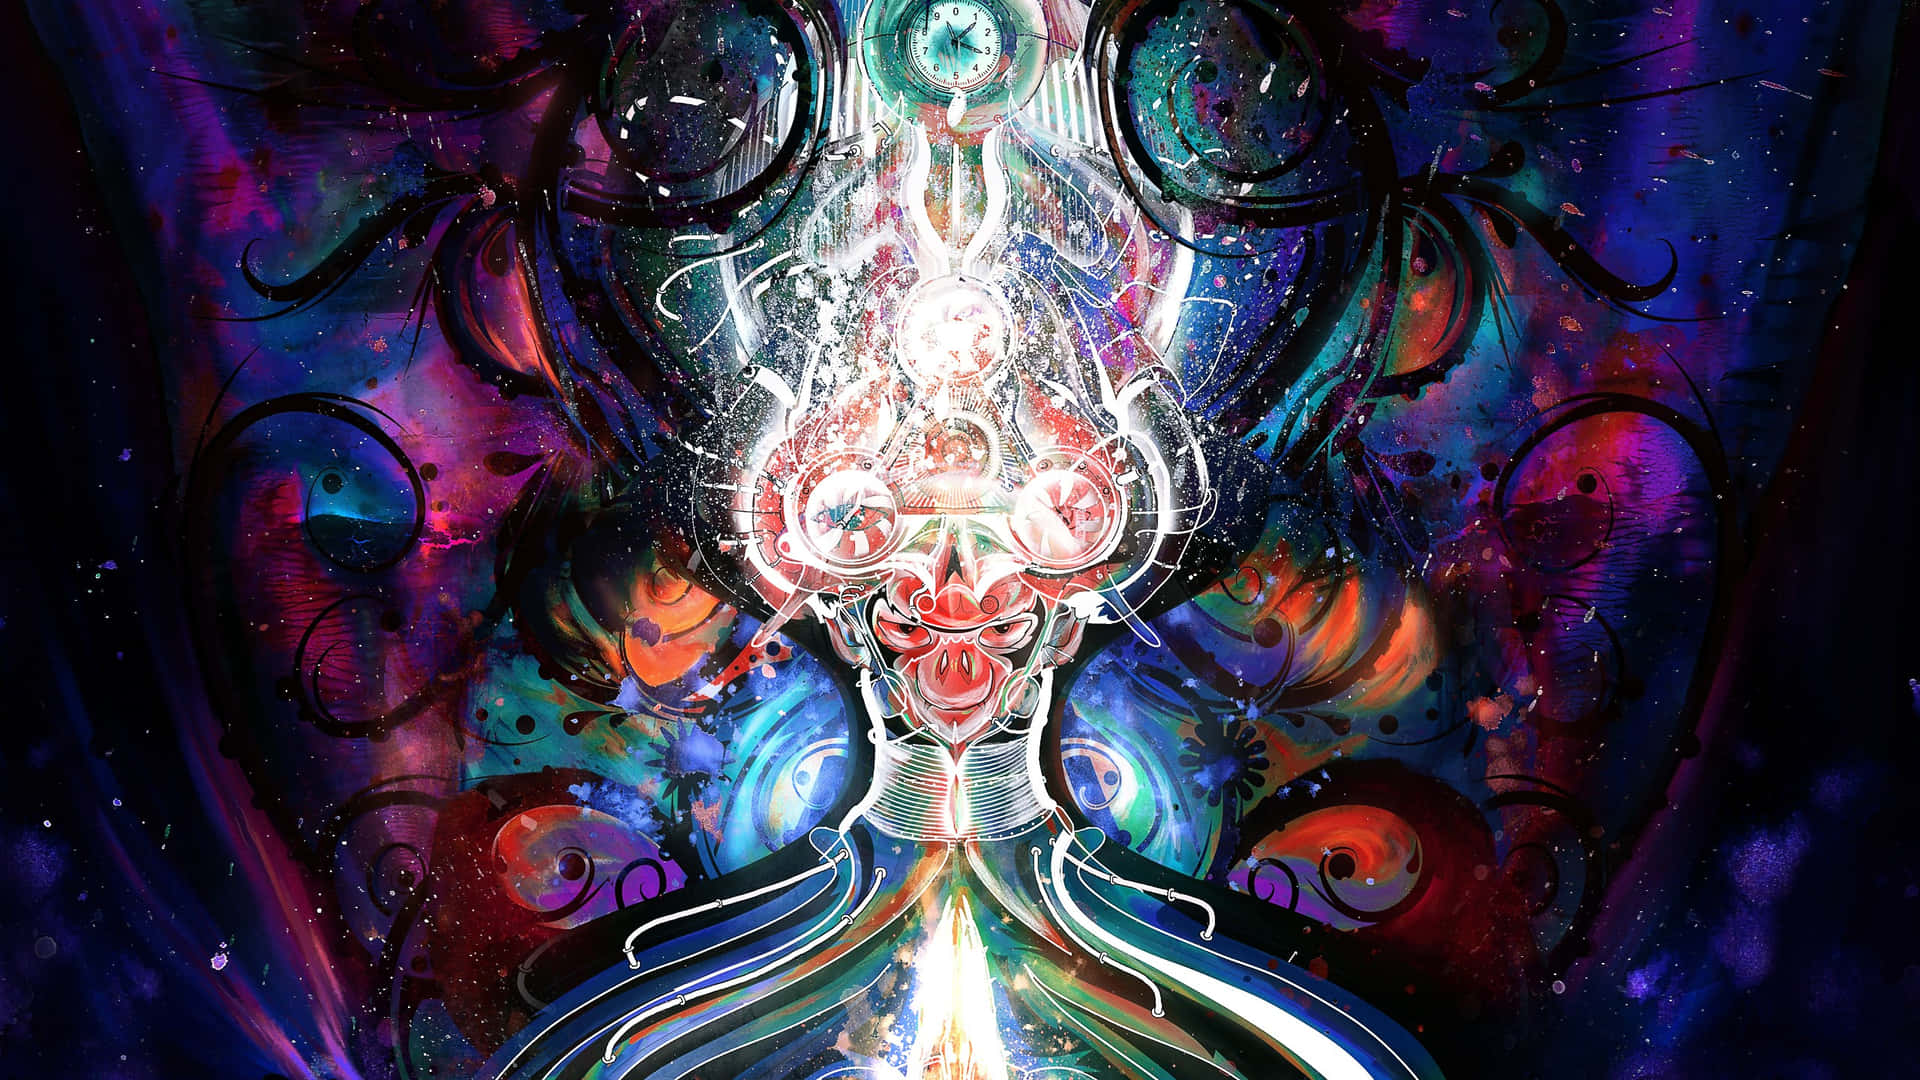 Journey into the Psychedelic Realm Wallpaper